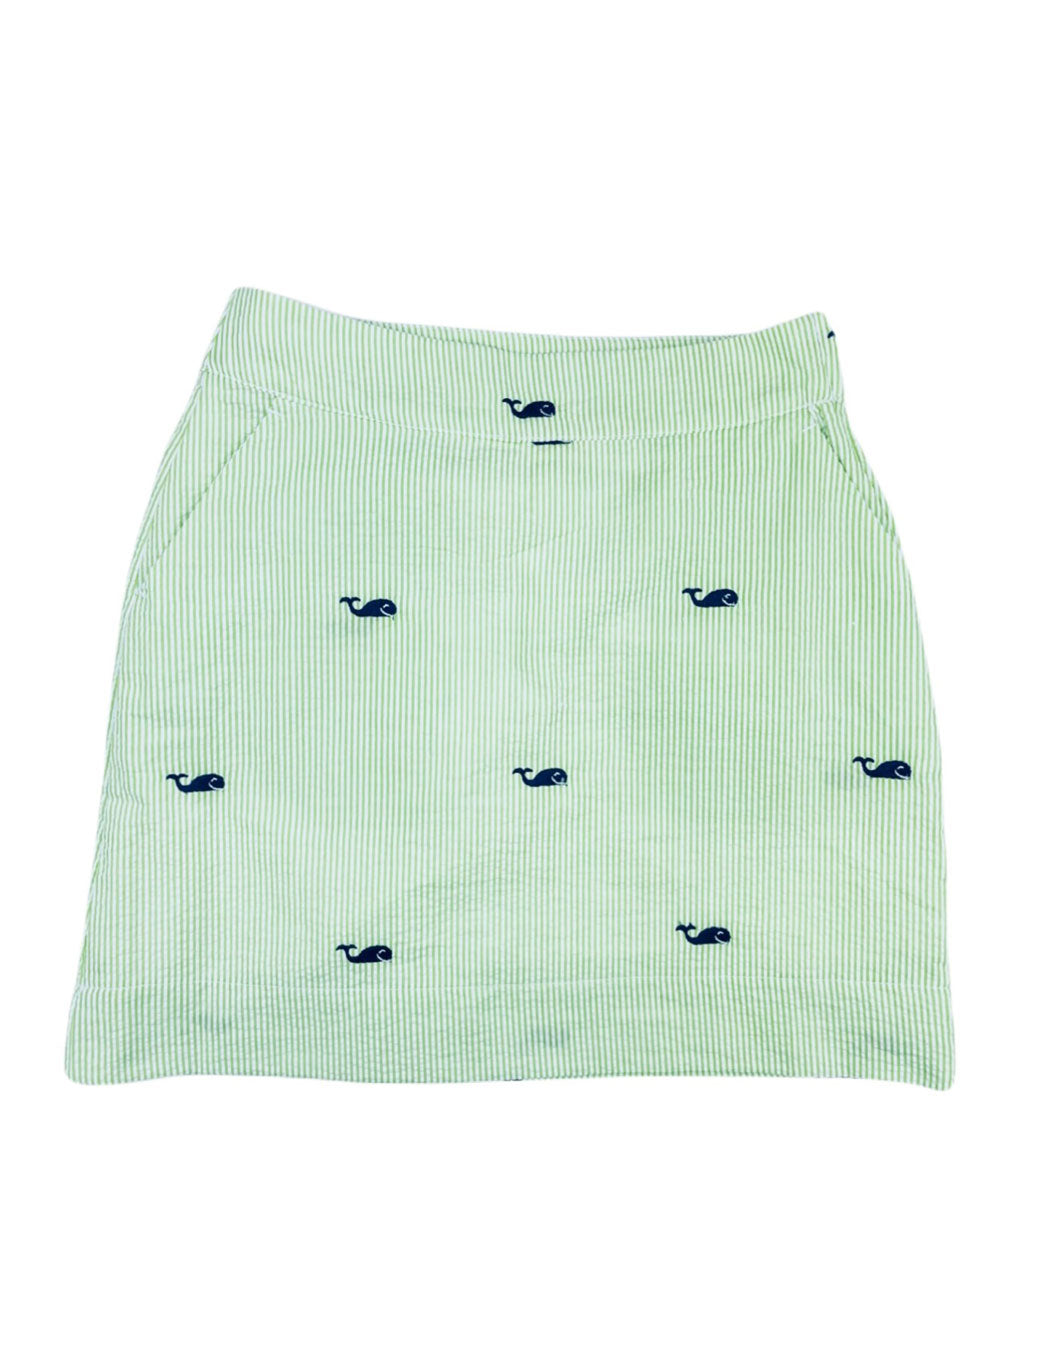 Green Seersucker Women's Skirt with Navy Embroidered Whales